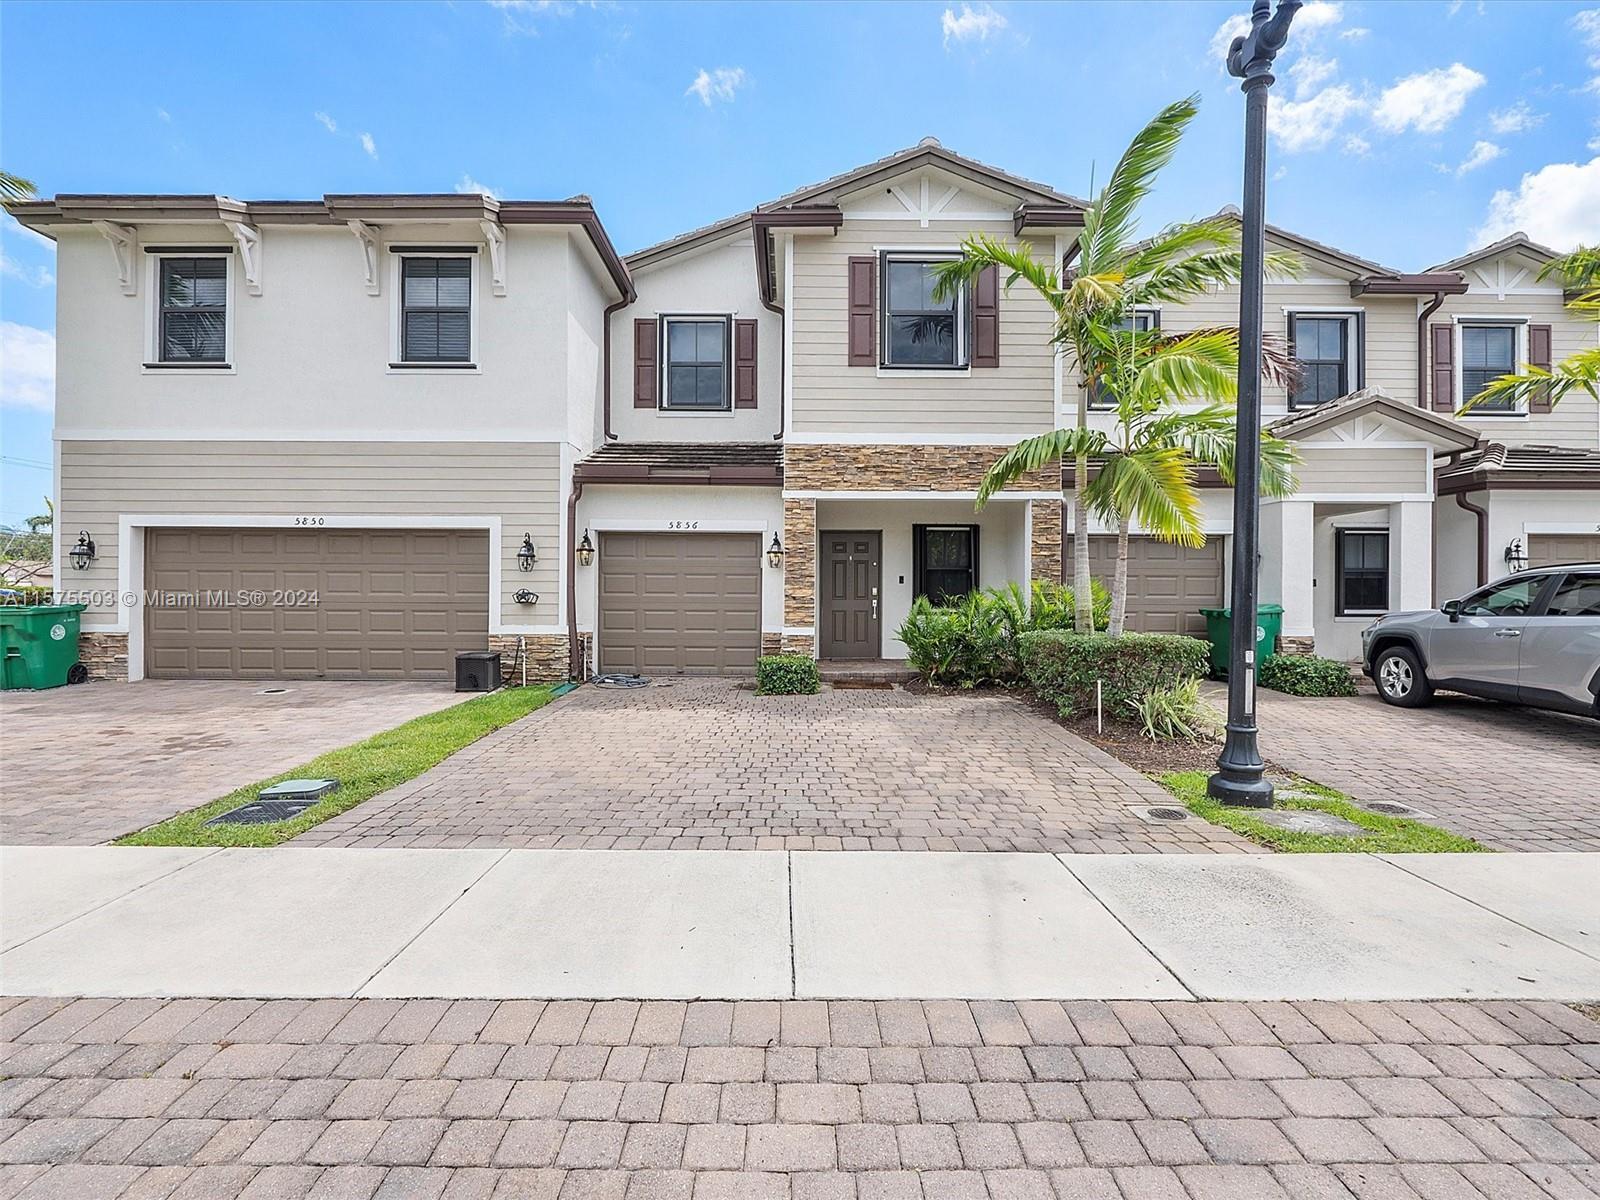 Photo of 5856 Clydesdale Ct in Davie, FL